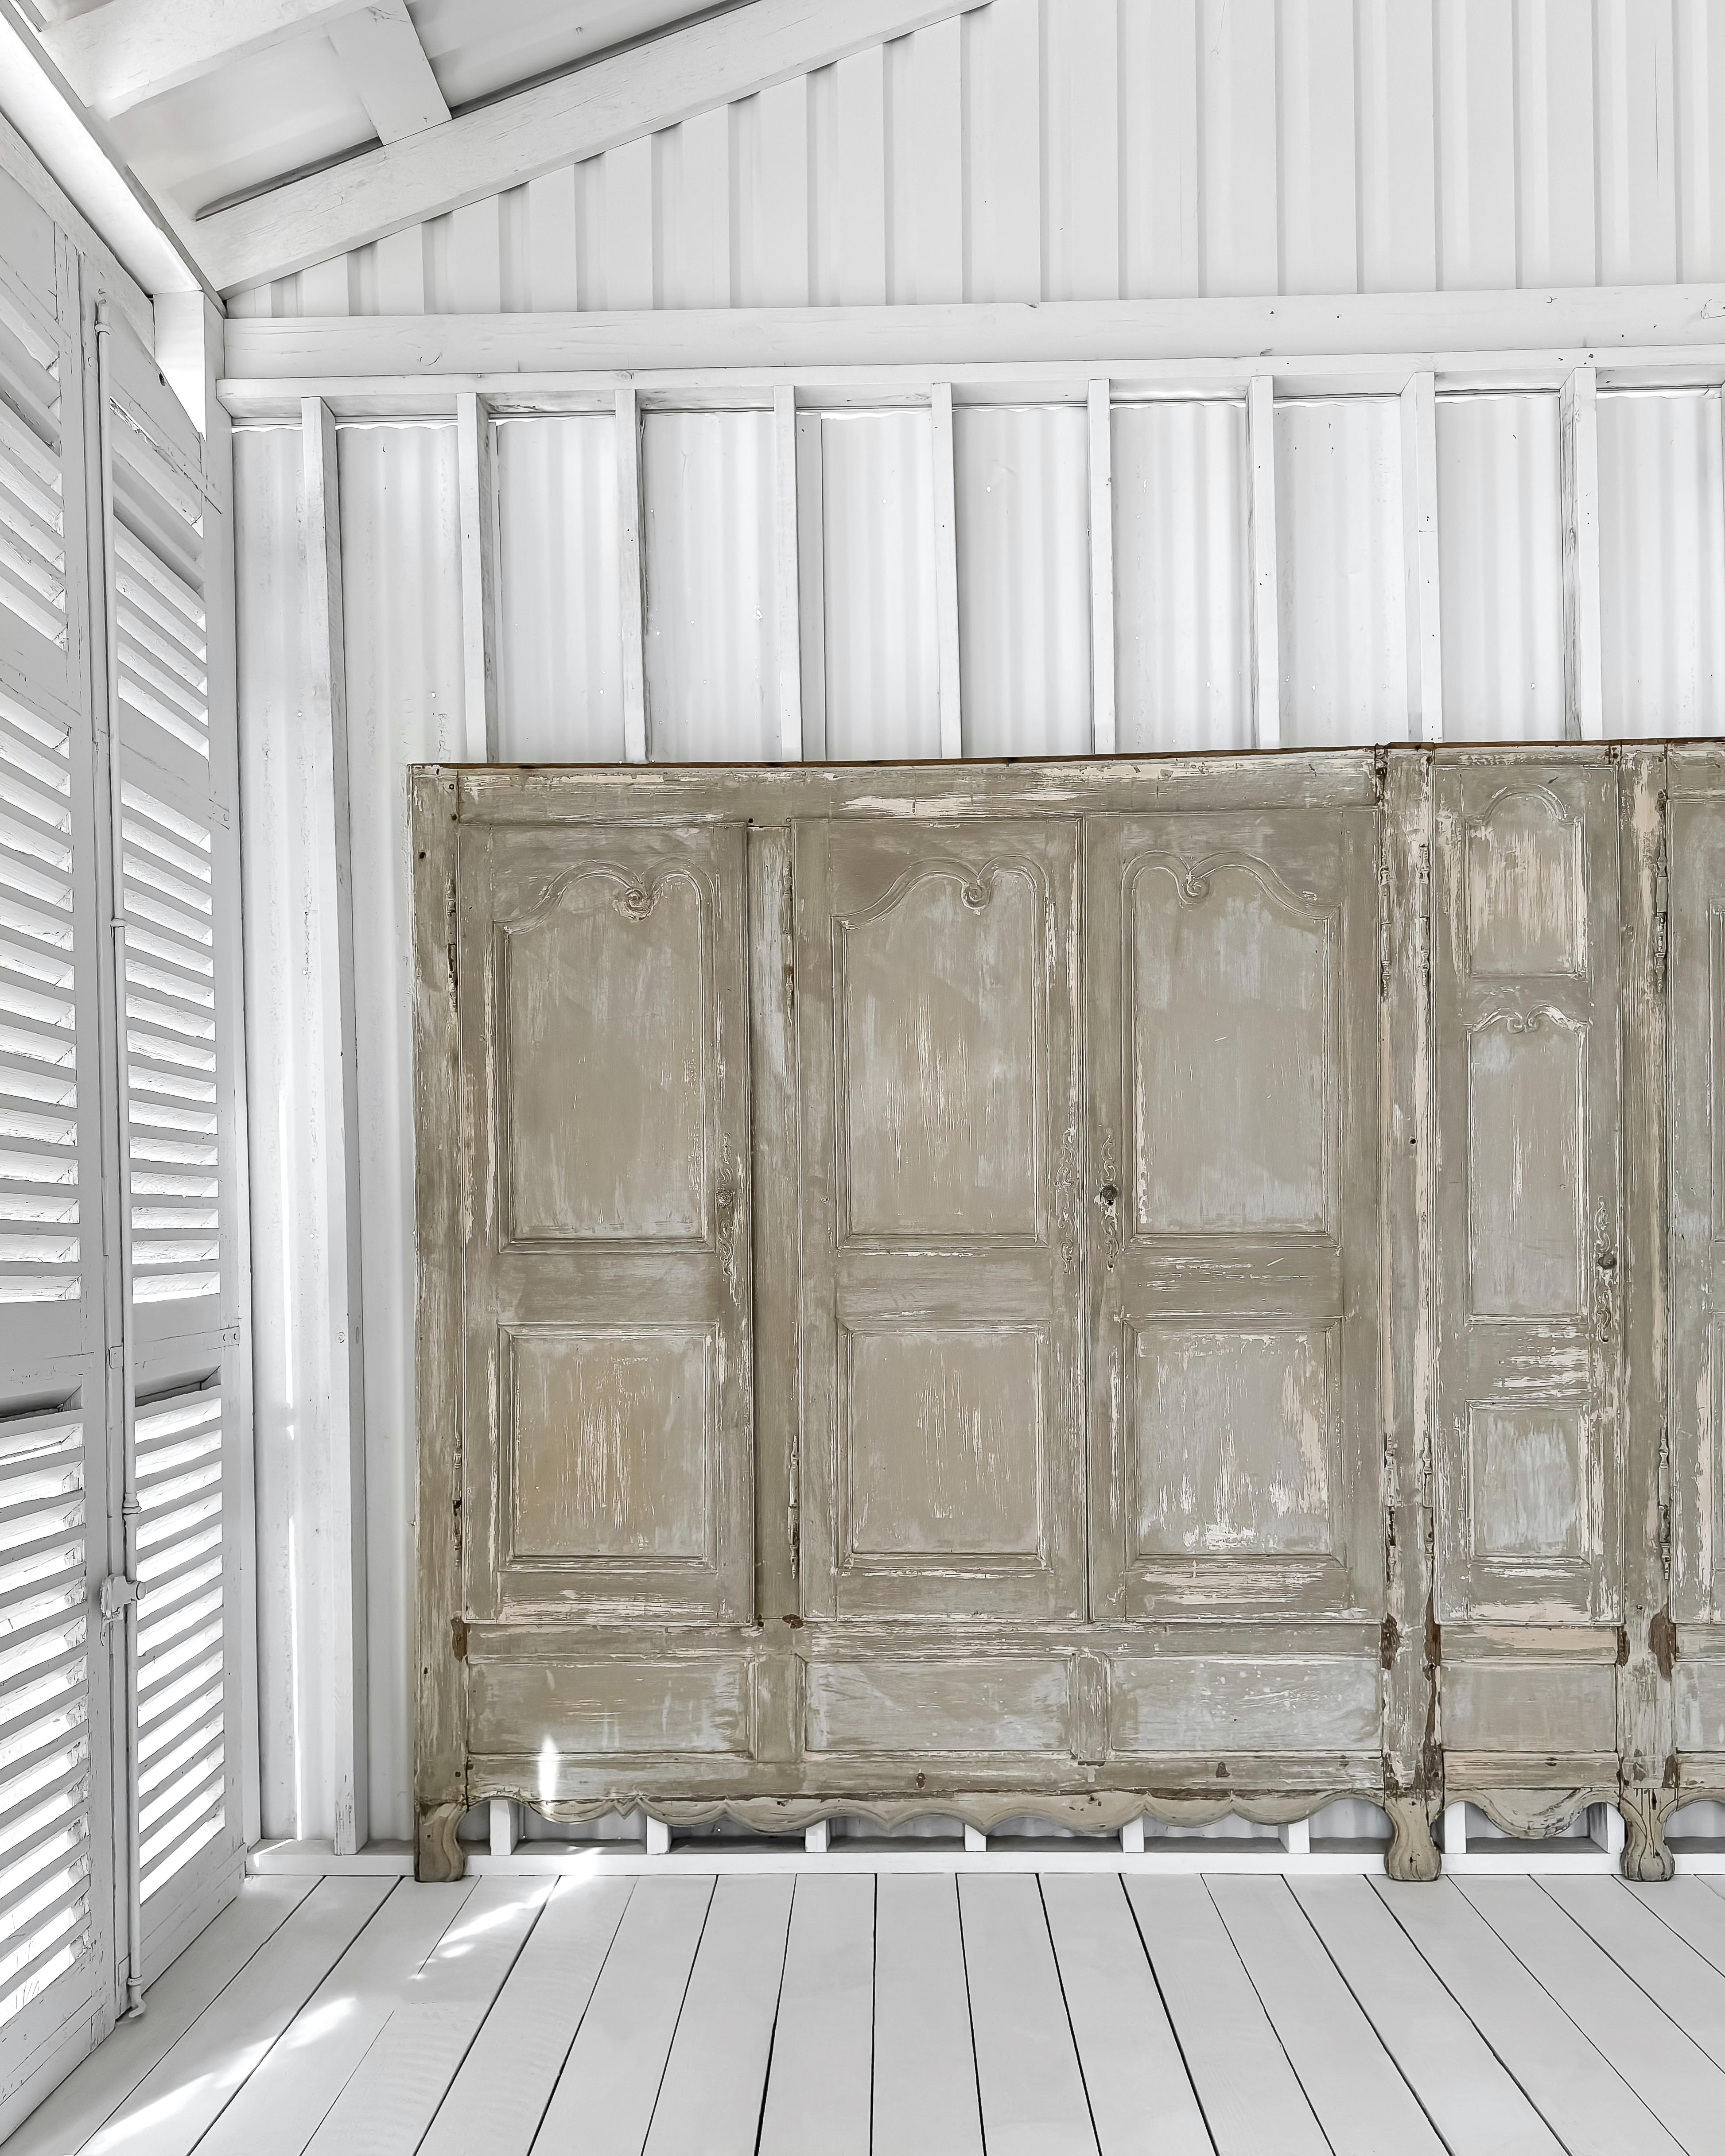 19th Century Built-In French Provincial Wardrobe Wall with Doors In Good Condition For Sale In Mckinney, TX